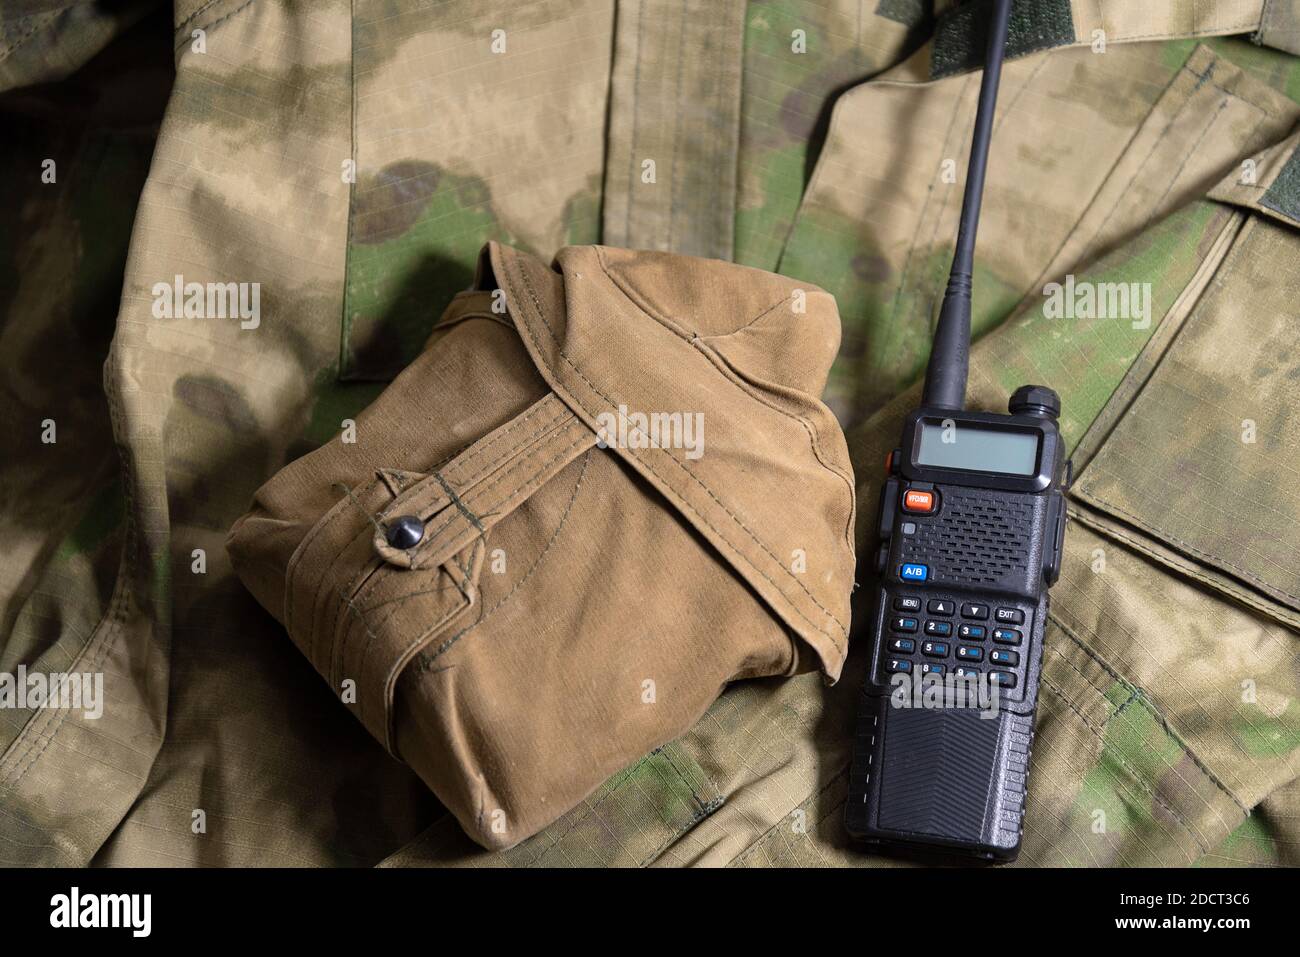 a black handheld radio lies next to the flask on a military camouflage jacket Stock Photo